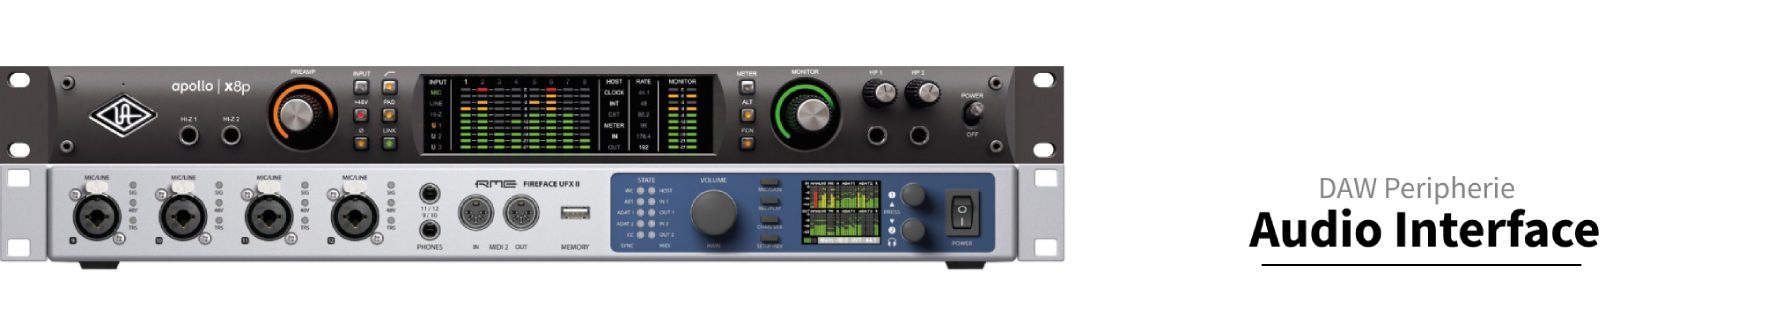 Audio Interface-8 Preamps-1 Port